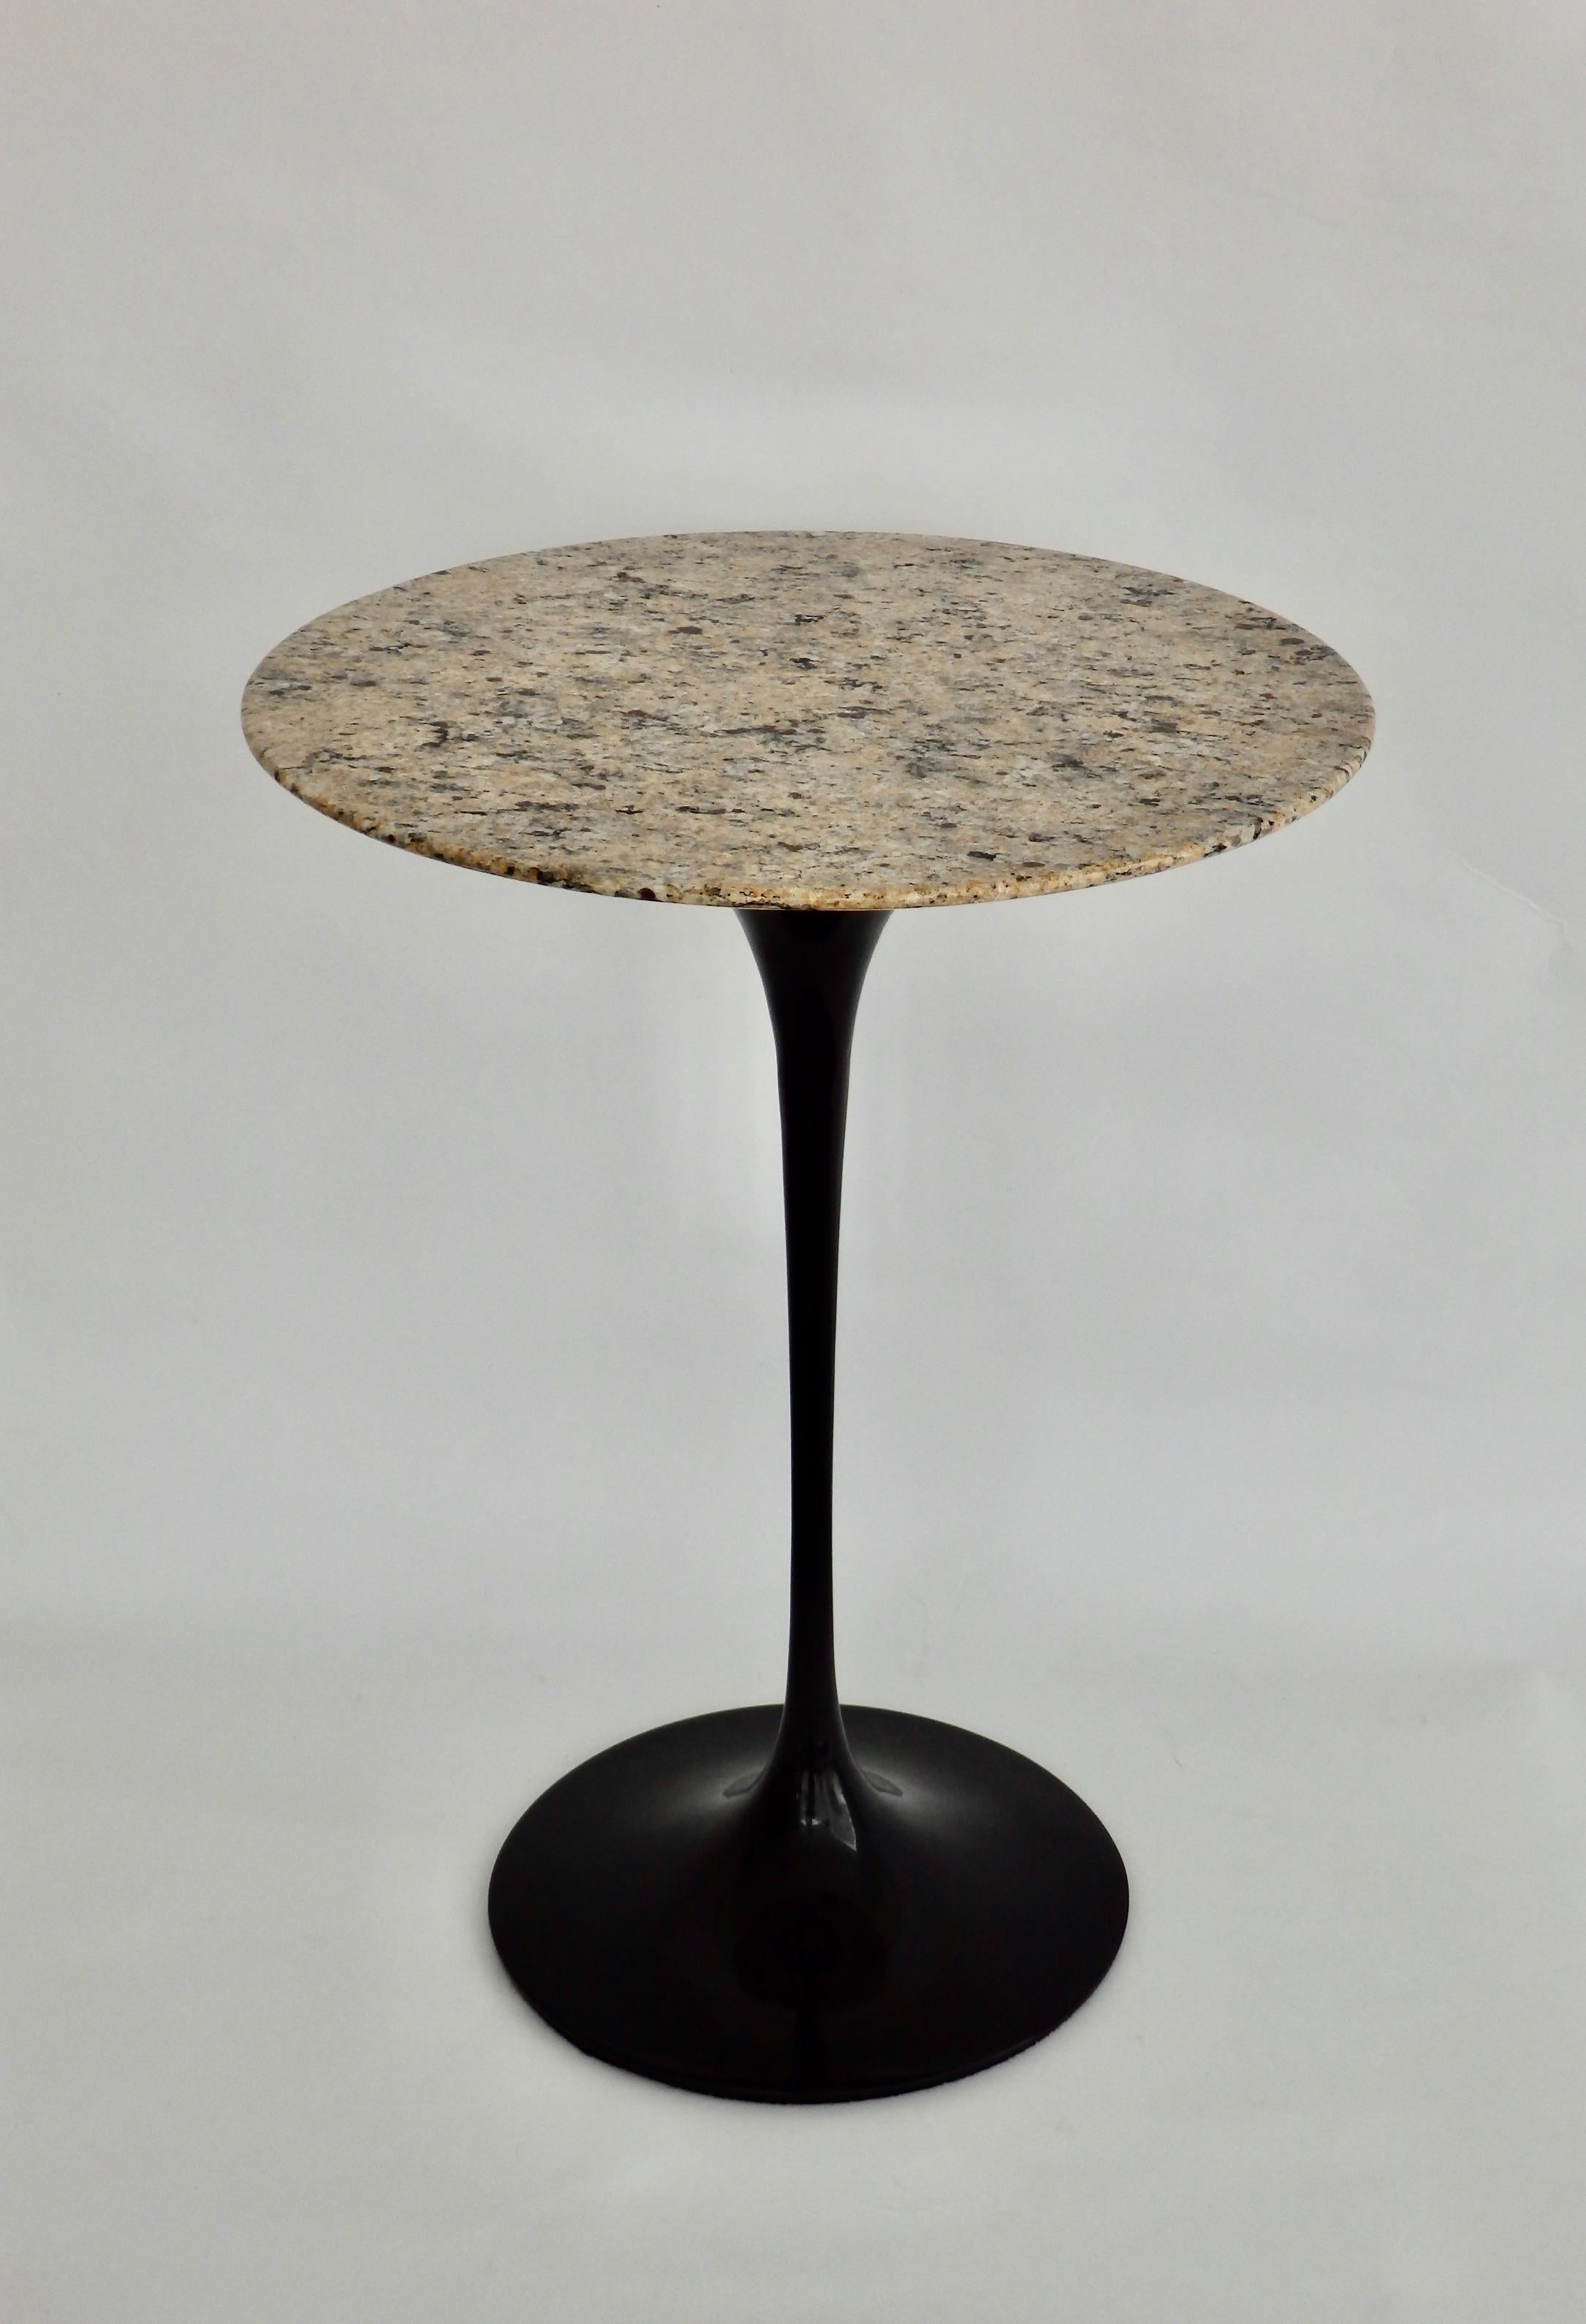 Early cast iron base Eero Saarinen table for Knoll with custom granite top .  Base refinished in black. Table will ship with top removed.